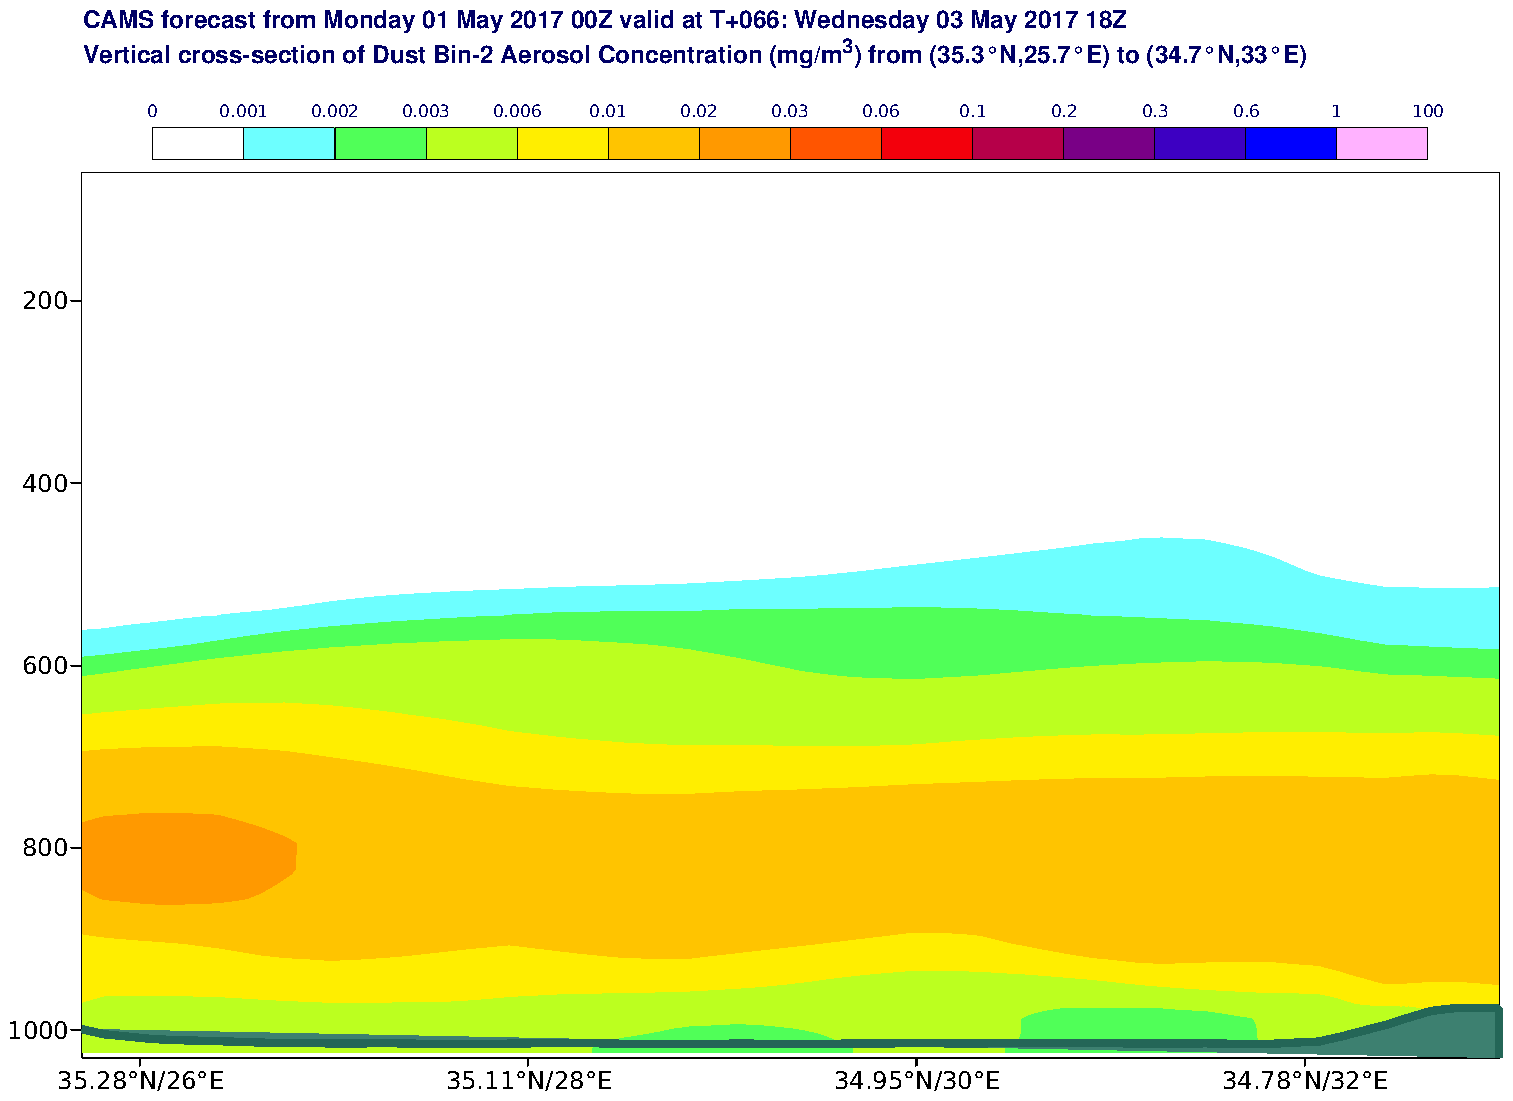 Vertical cross-section of Dust Bin-2 Aerosol Concentration (mg/m3) valid at T66 - 2017-05-03 18:00